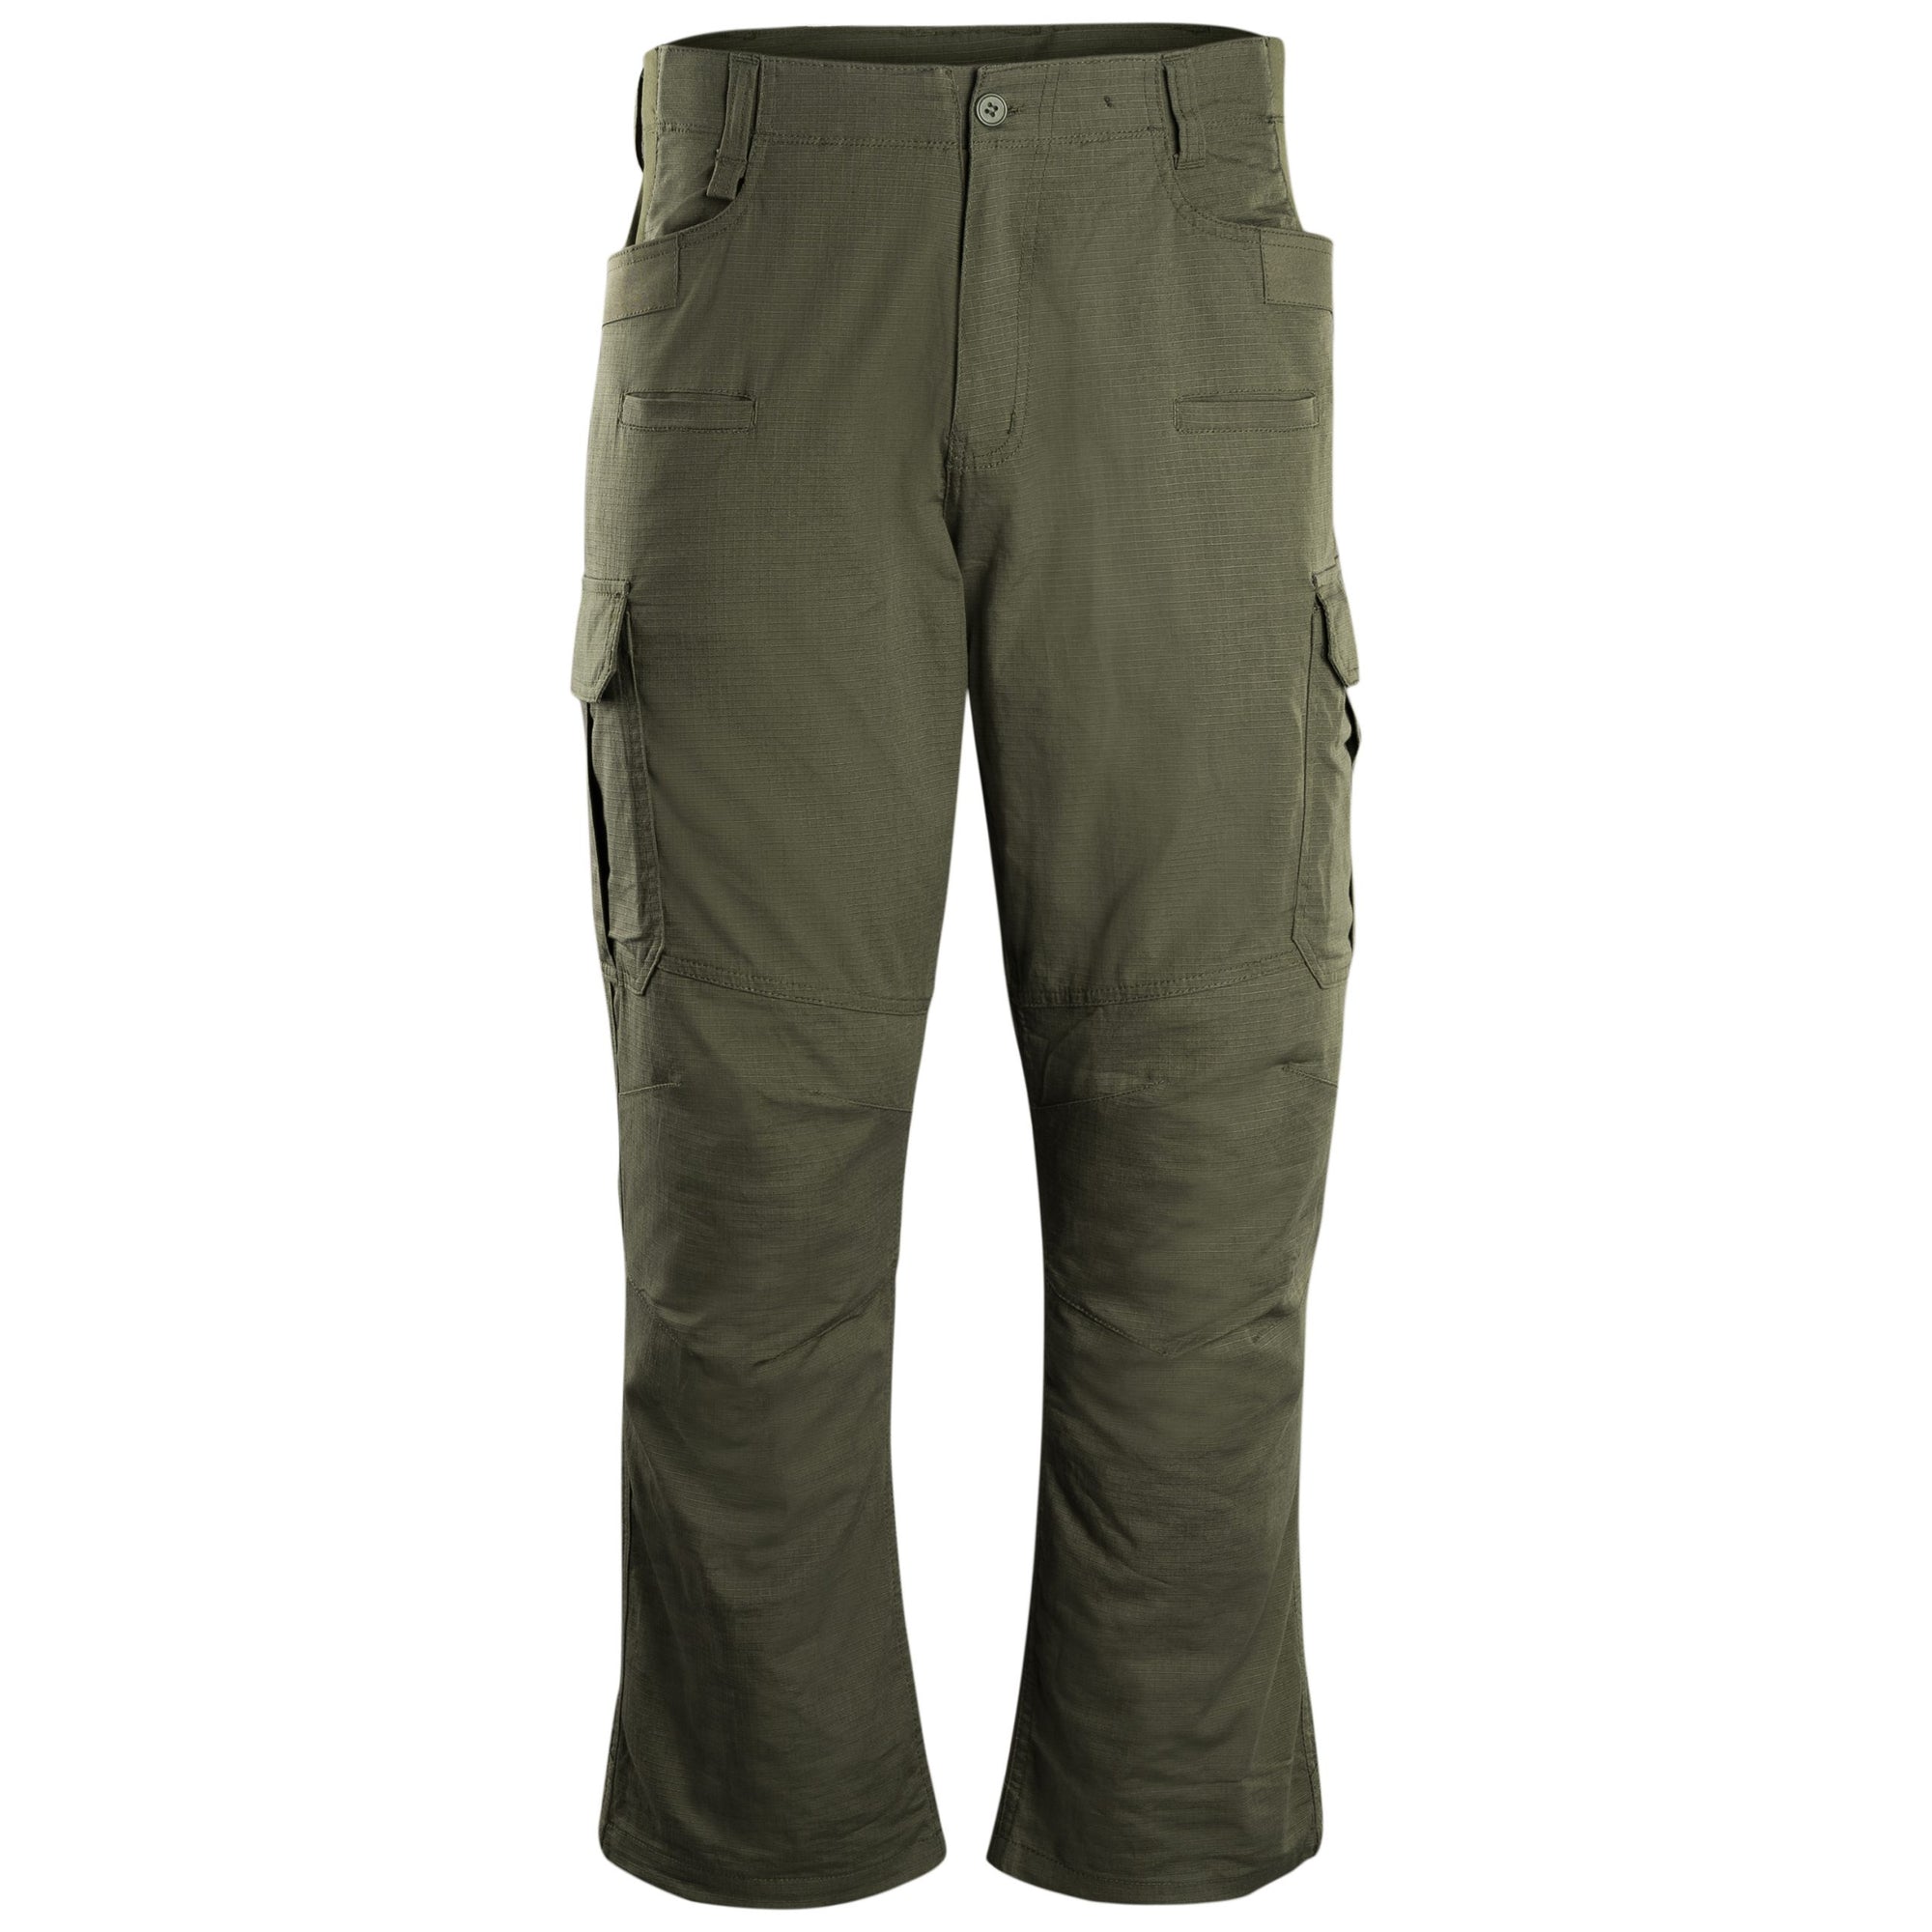 STOIRM Tactical Trousers Olive Green